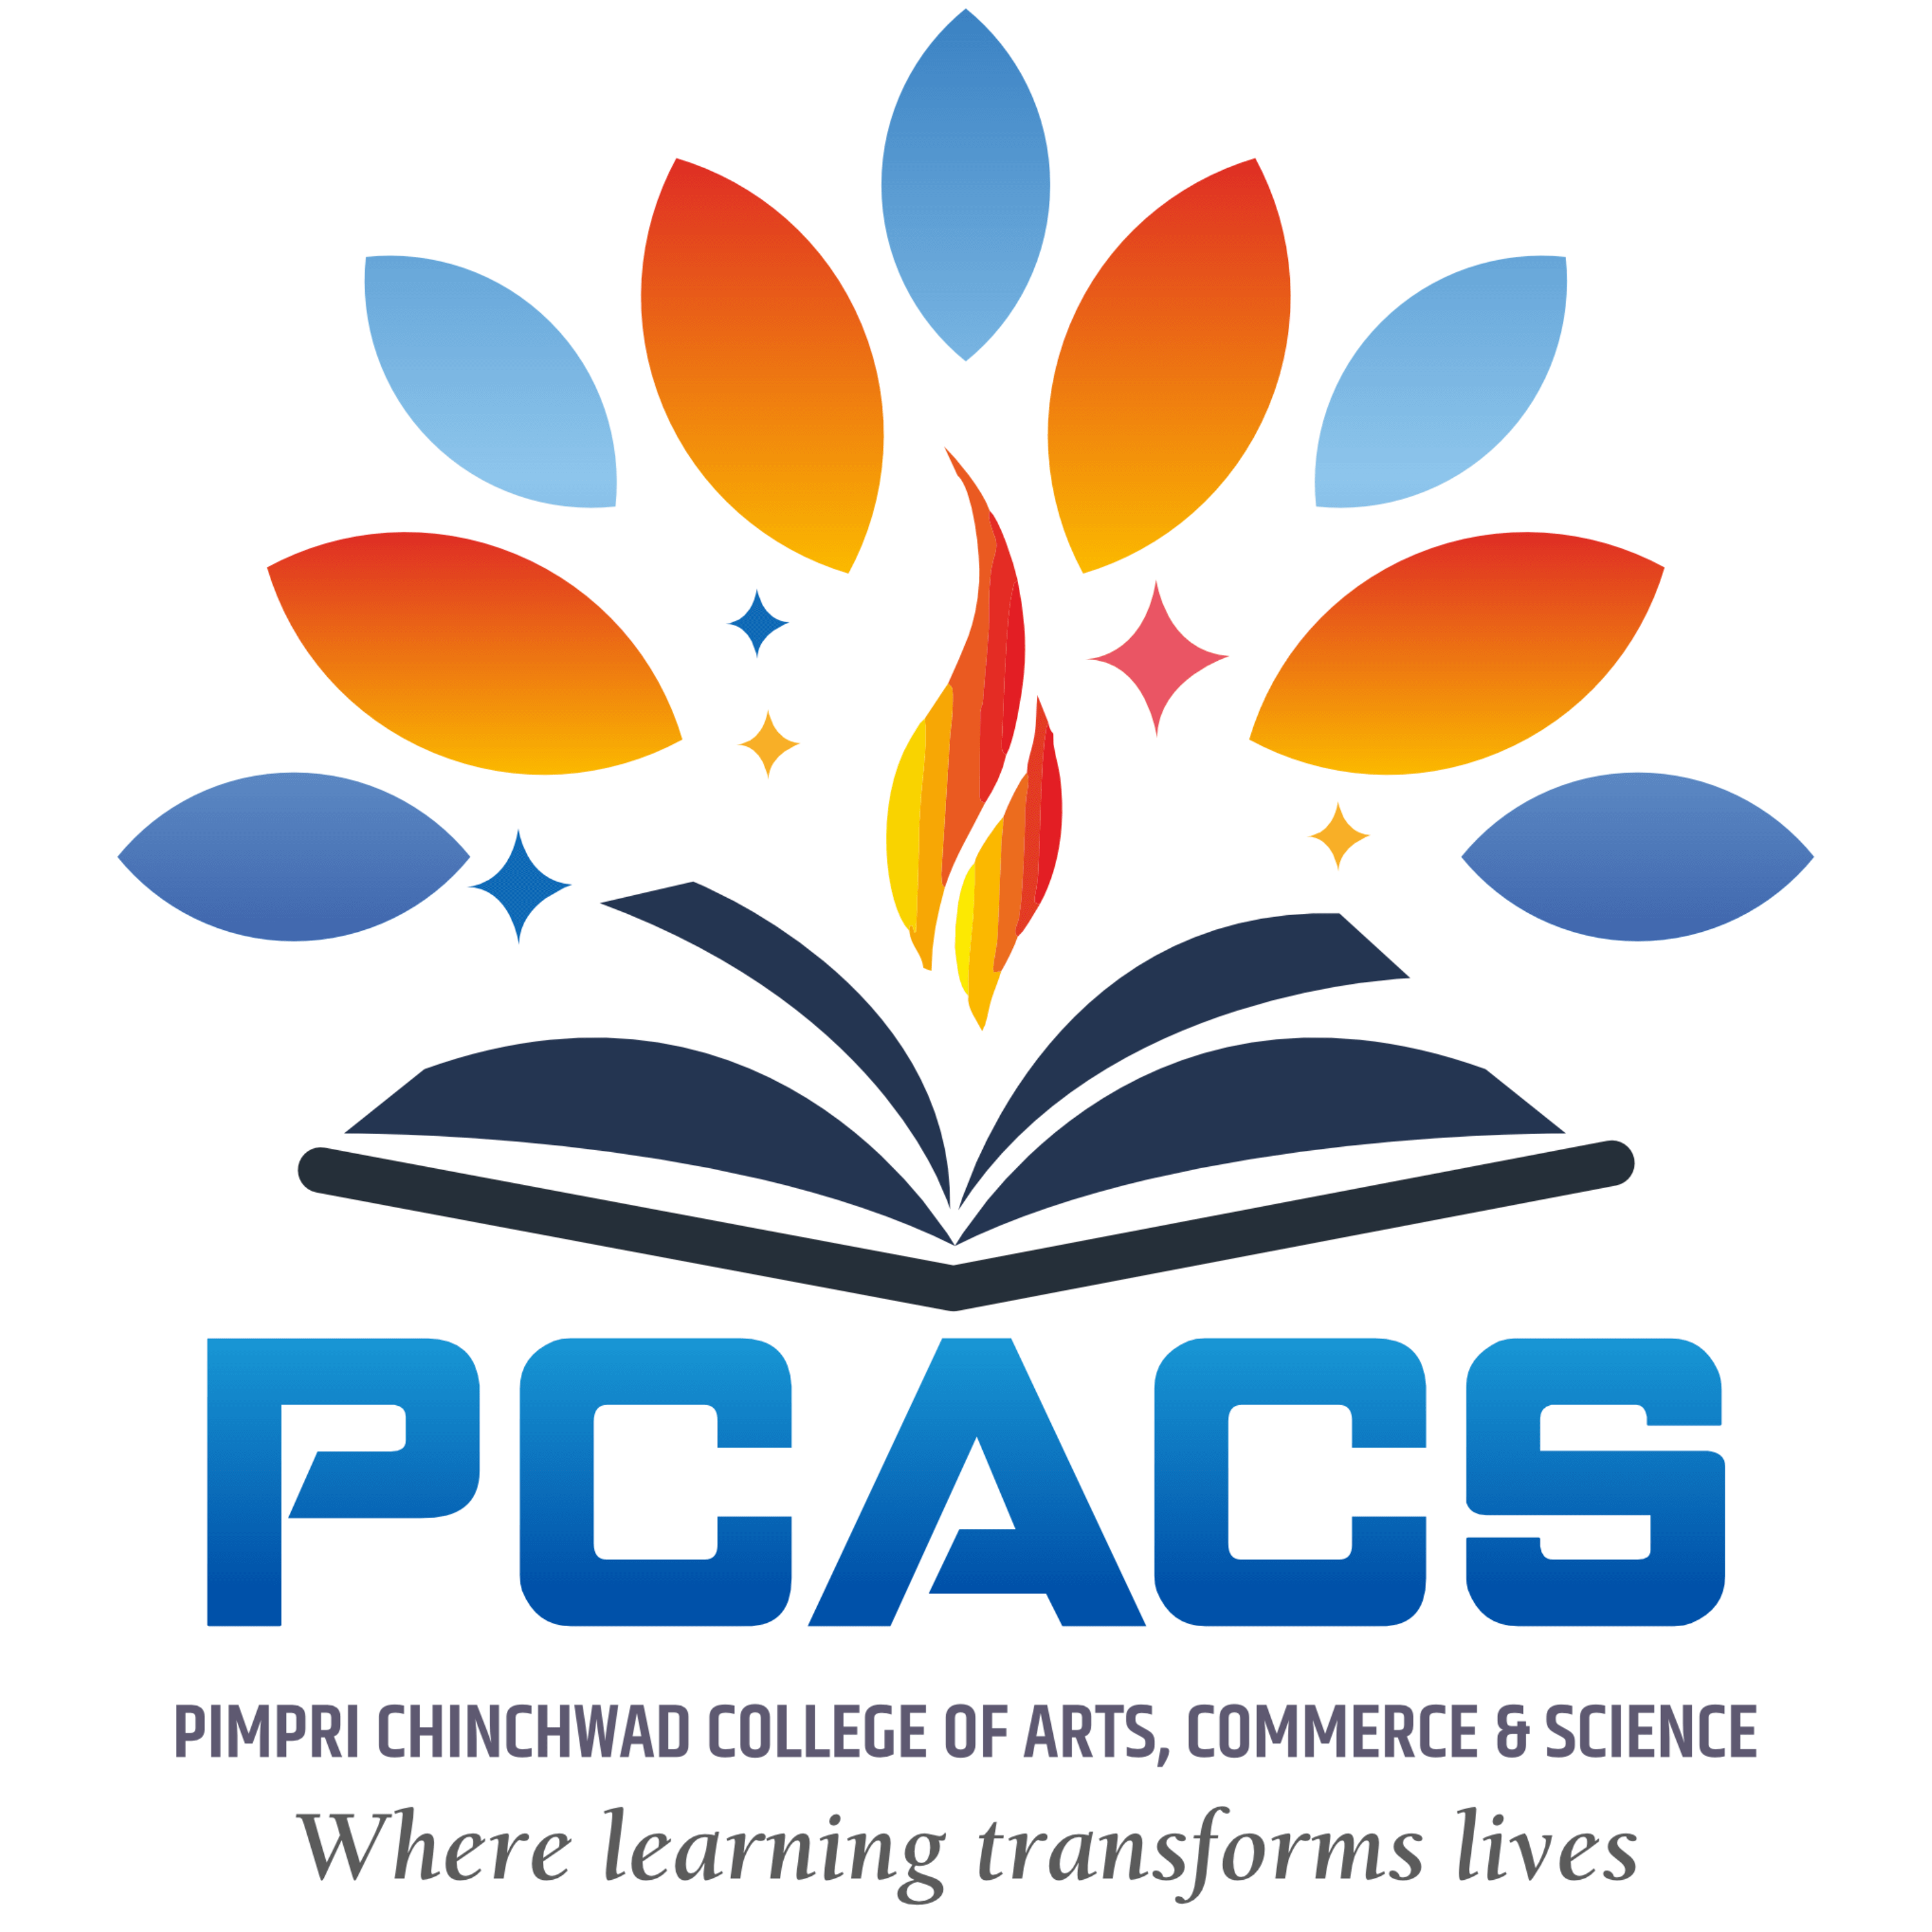 Pimpri Chinchwad College of Arts, Commerce and Science (PCACS)